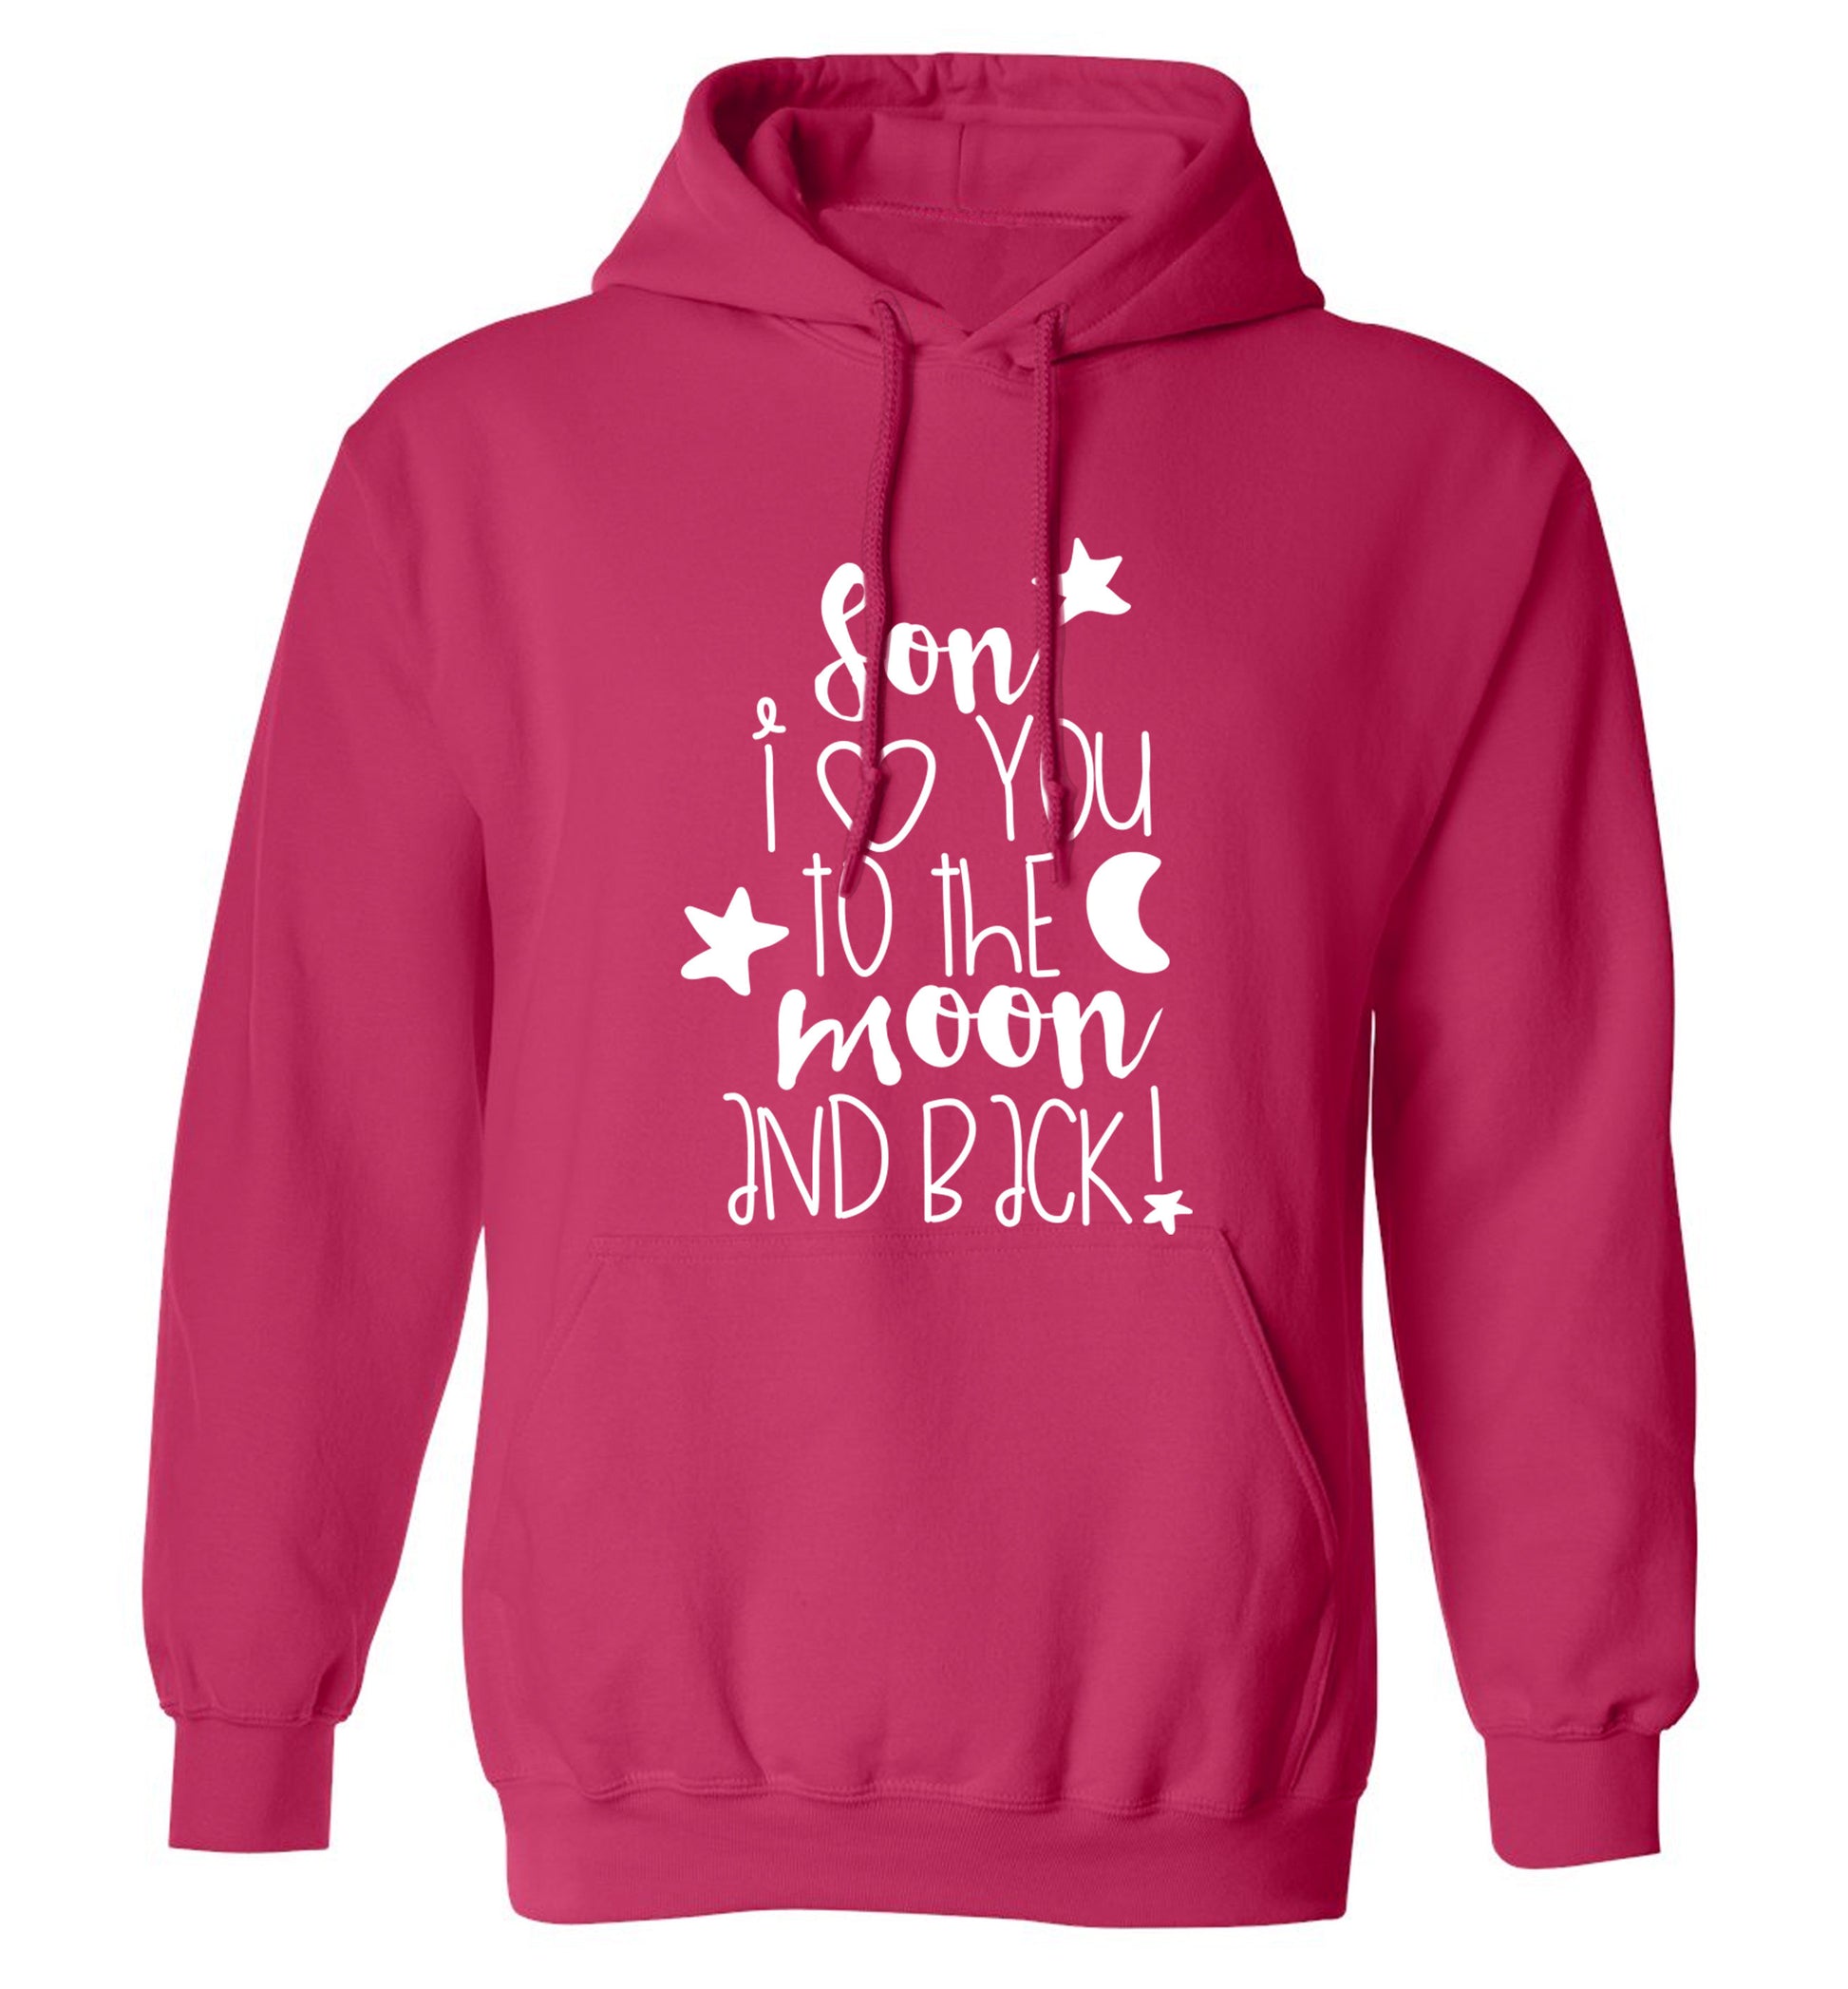 Son I love you to the moon and back adults unisex pink hoodie 2XL